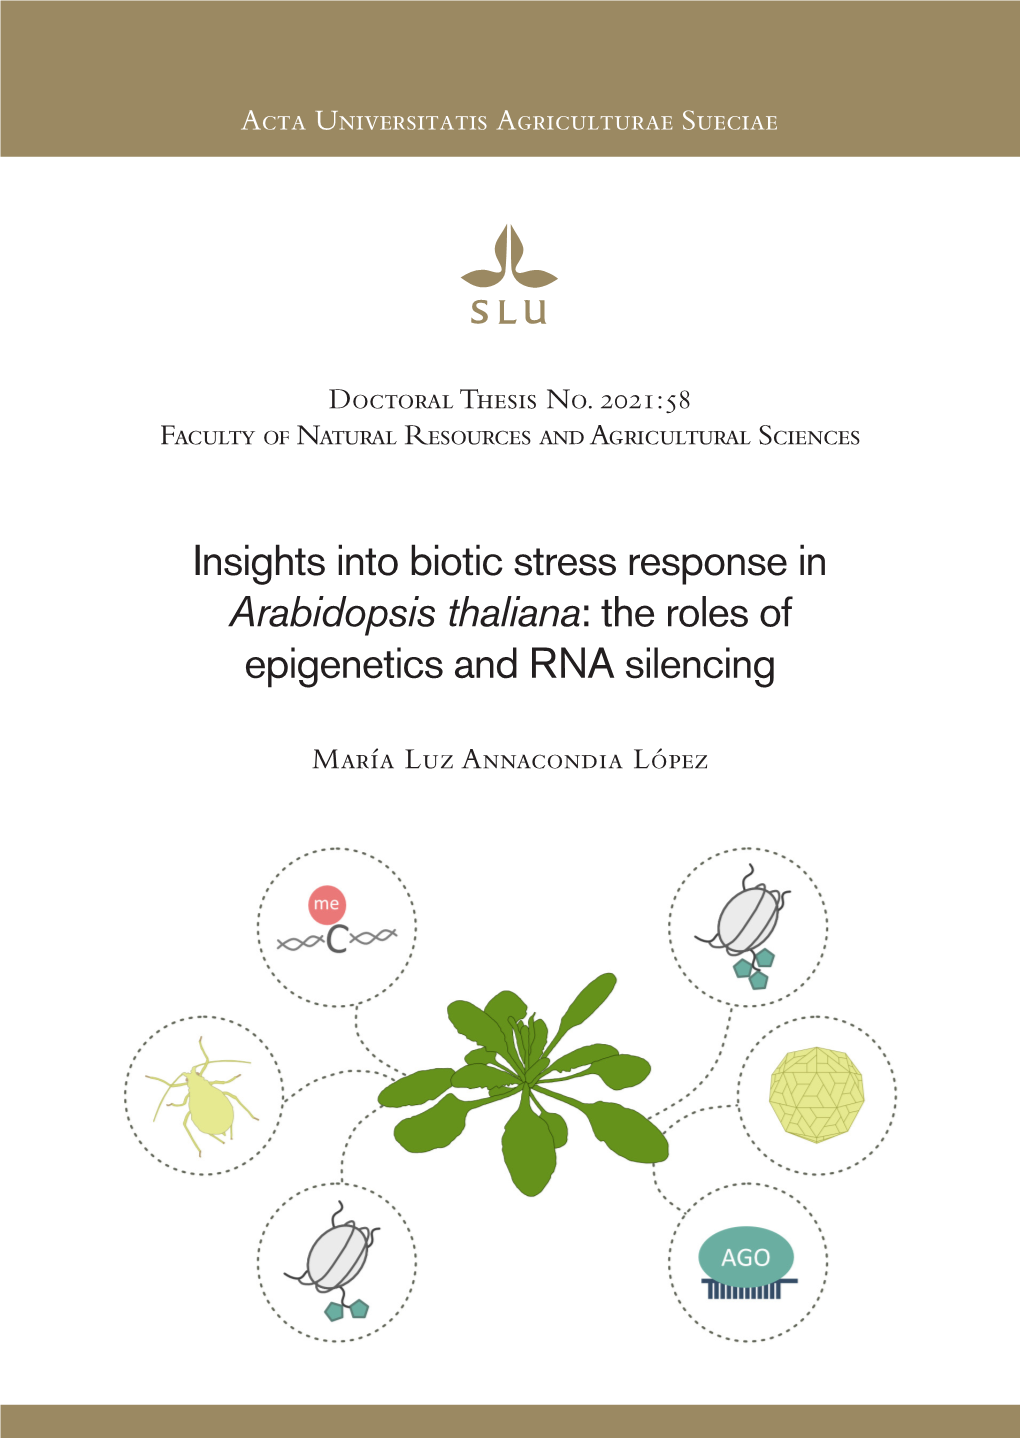 Insights Into Biotic Stress Response in Arabidopsis Thaliana: the Roles of Epigenetics and RNA Silencing